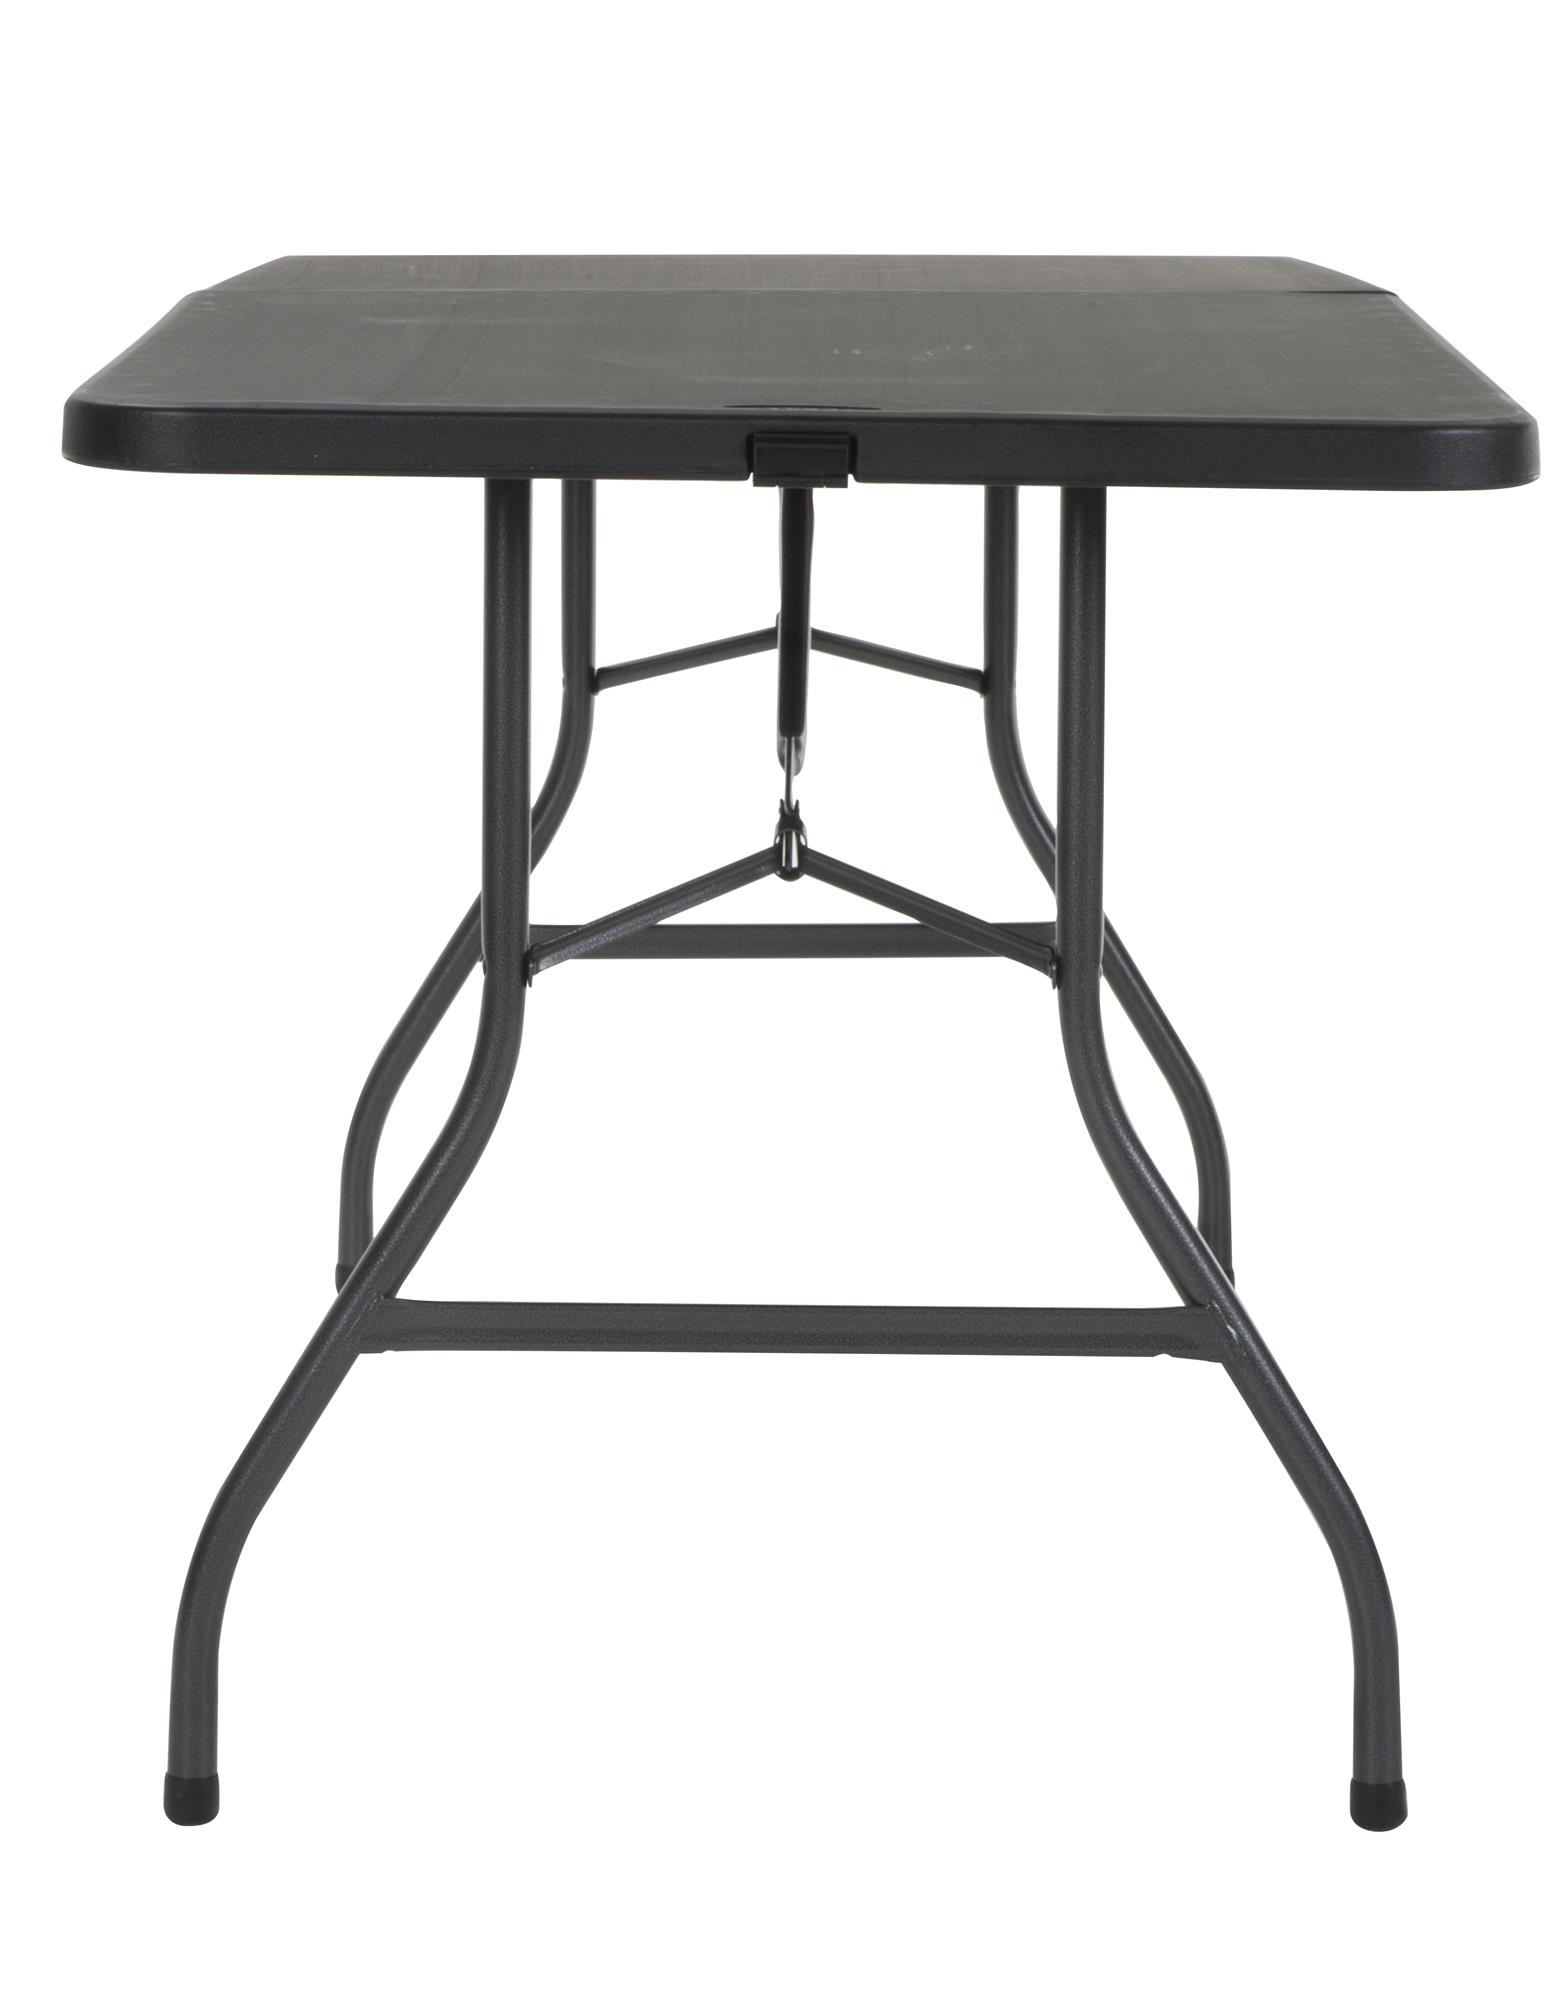 Cosco 6 Foot Centerfold Folding Table, Black - image 5 of 27